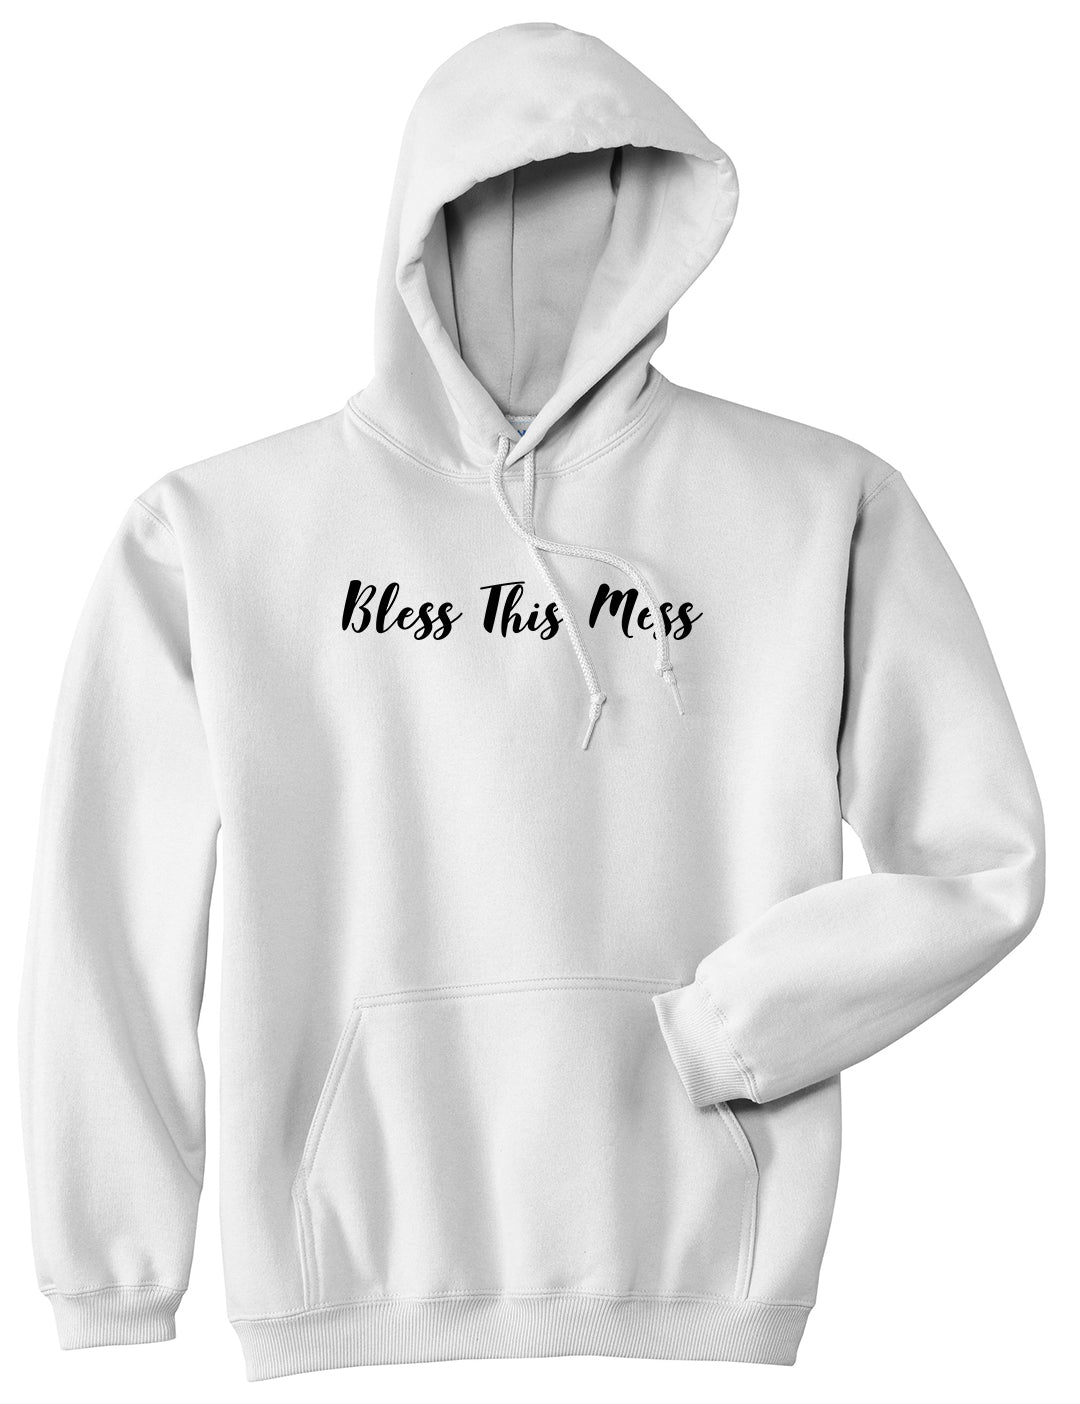 Bless This Mess White Pullover Hoodie by Kings Of NY